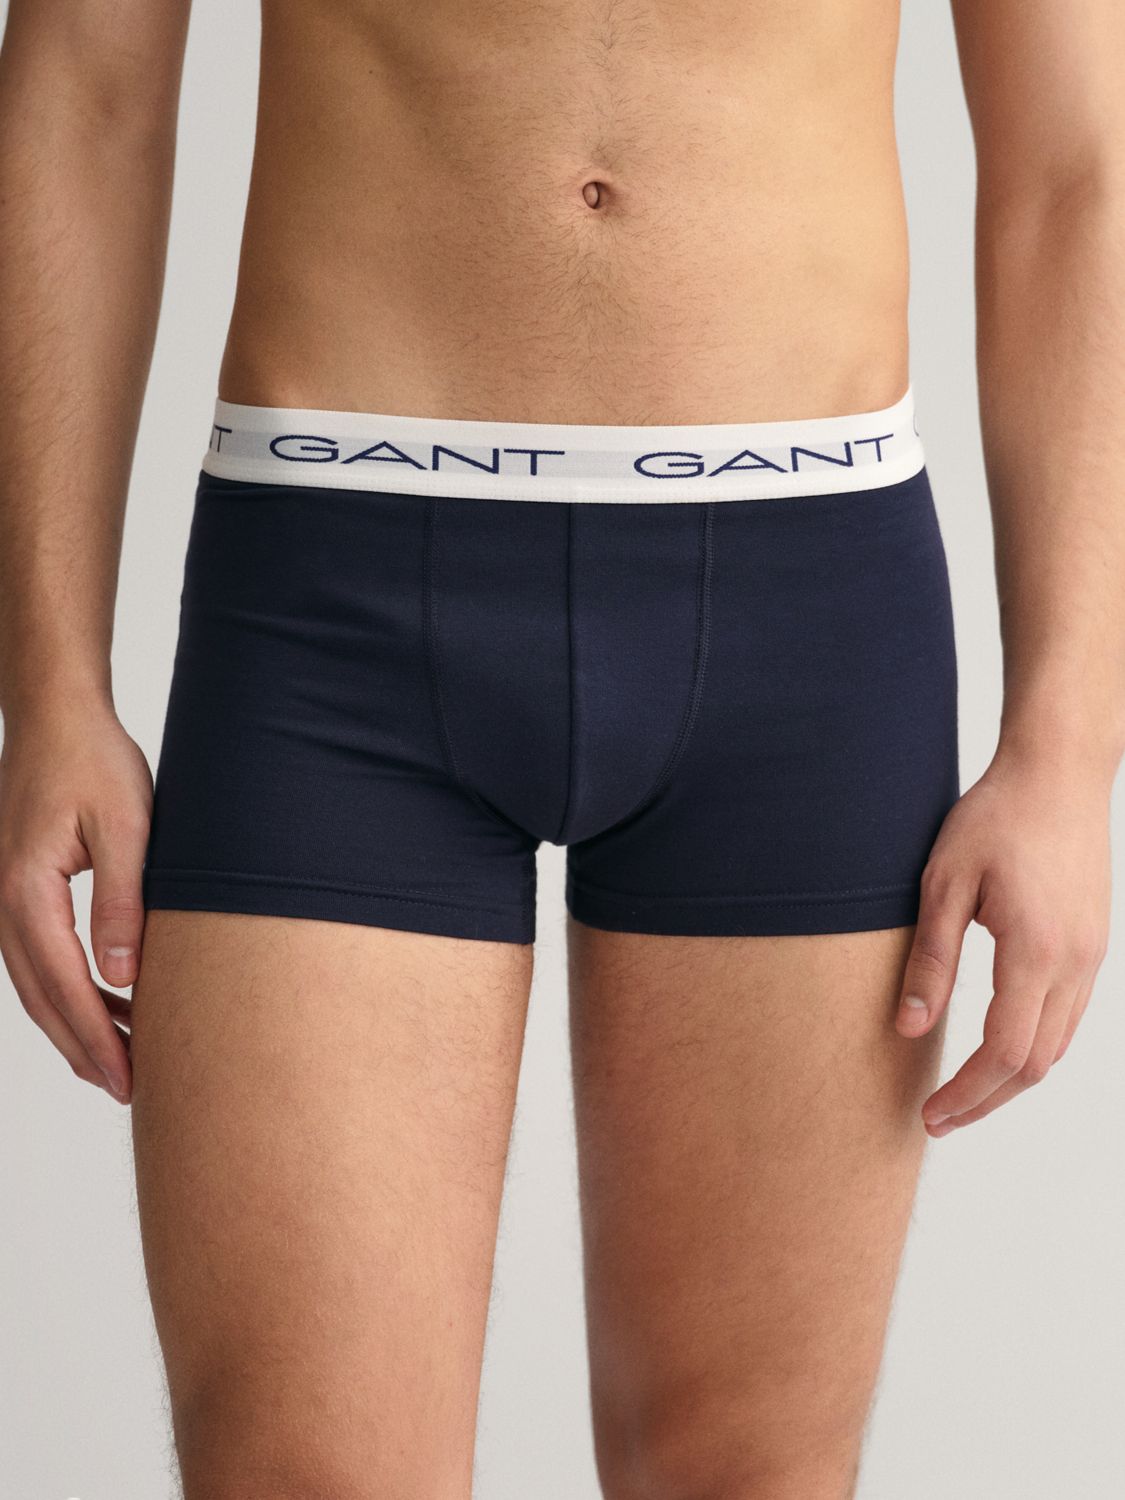 GANT Cotton Stretch Jersey Trunks, Pack of 3, Navy/Red/White, XL